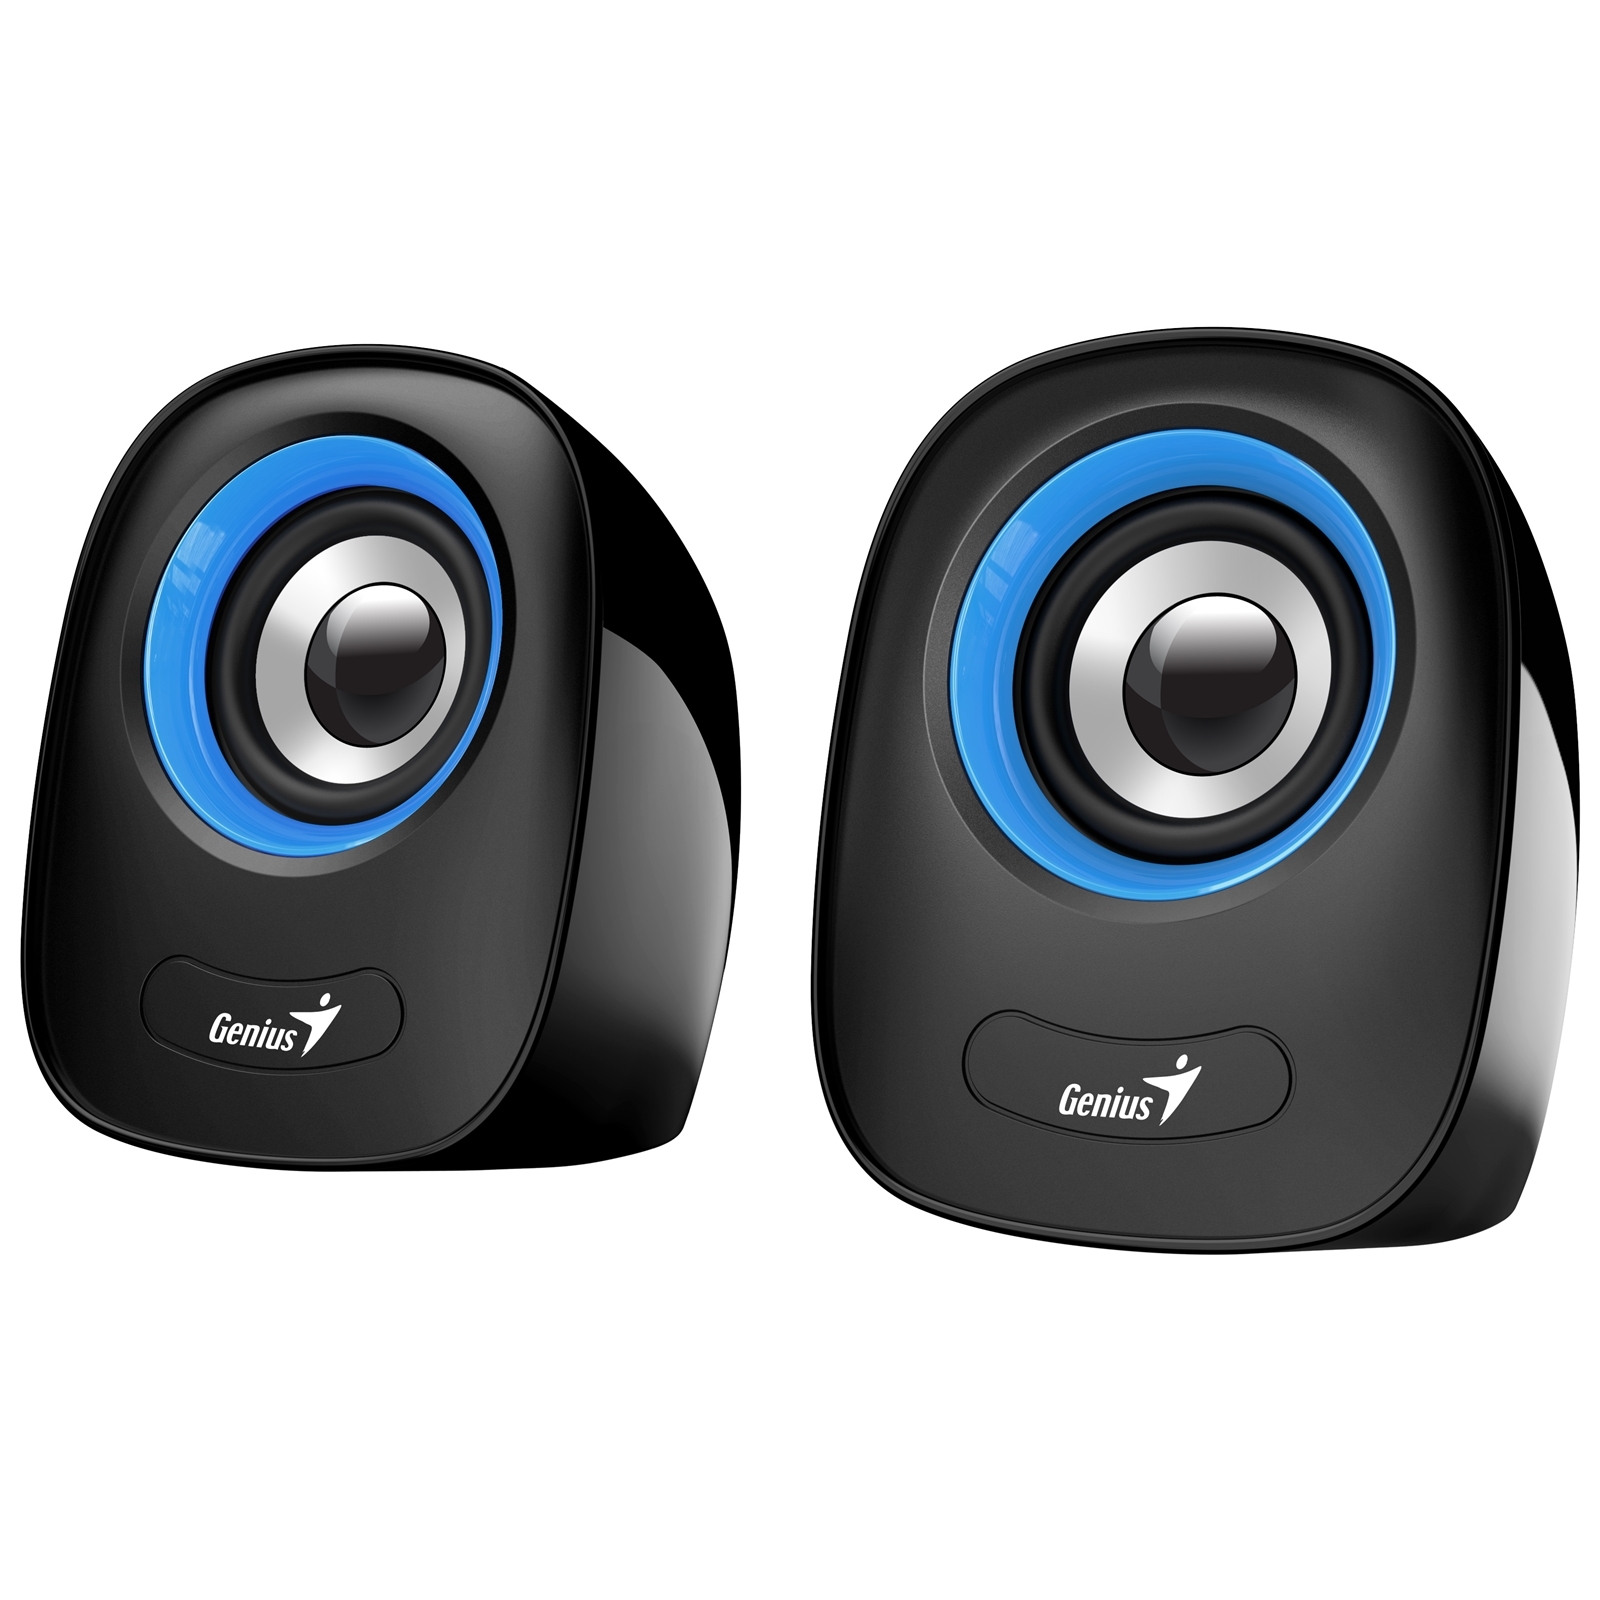 Genius 2.0 Desktop Speakers, Stereo Sound, USB Powered Plug and Play, 6w, 3.5mm Volume - Black / Blue | Falcon Computers